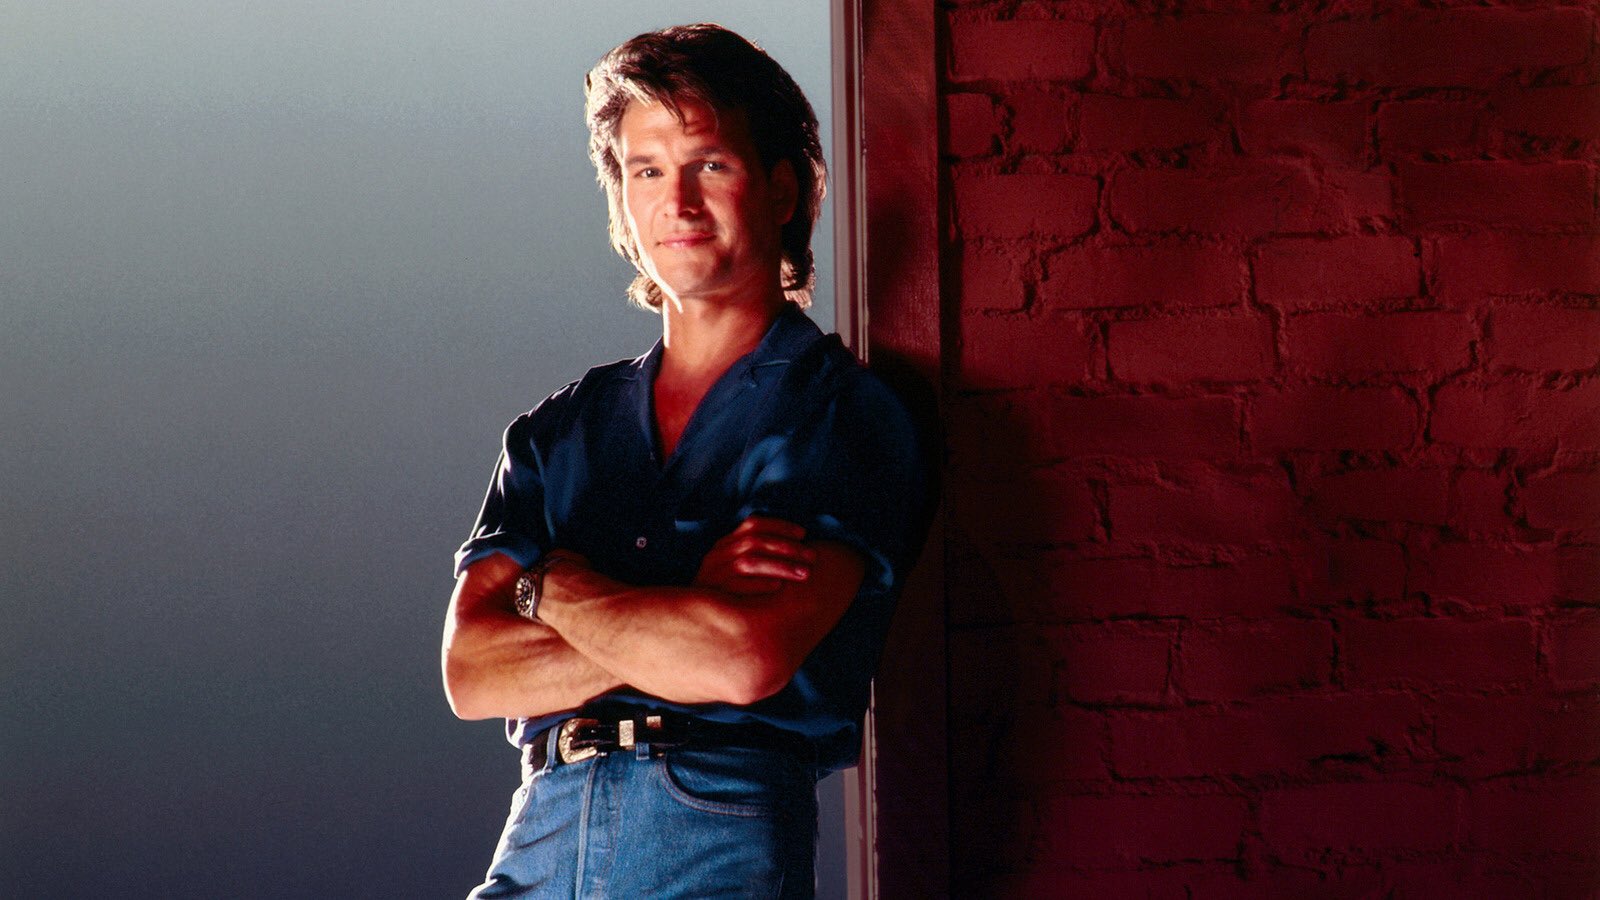 Happy Birthday to Patrick Swayze who would have been 70 today 